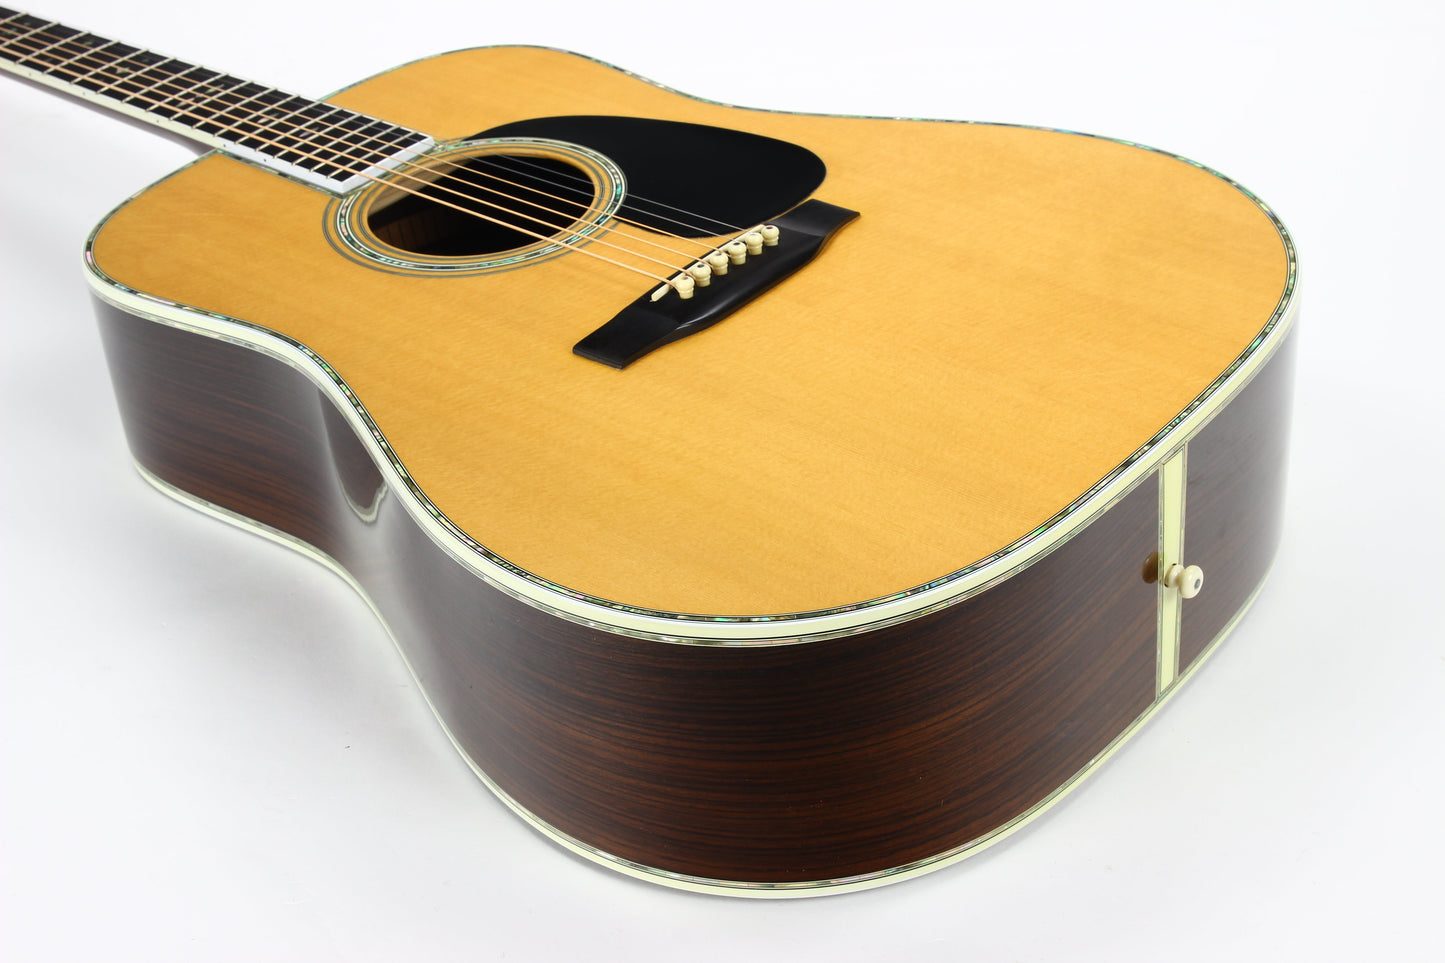 1983 Martin D-45 Custom 150th Anniversary Slot Headstock, 14-Fret, Limited Edition VINTAGE CANNON!